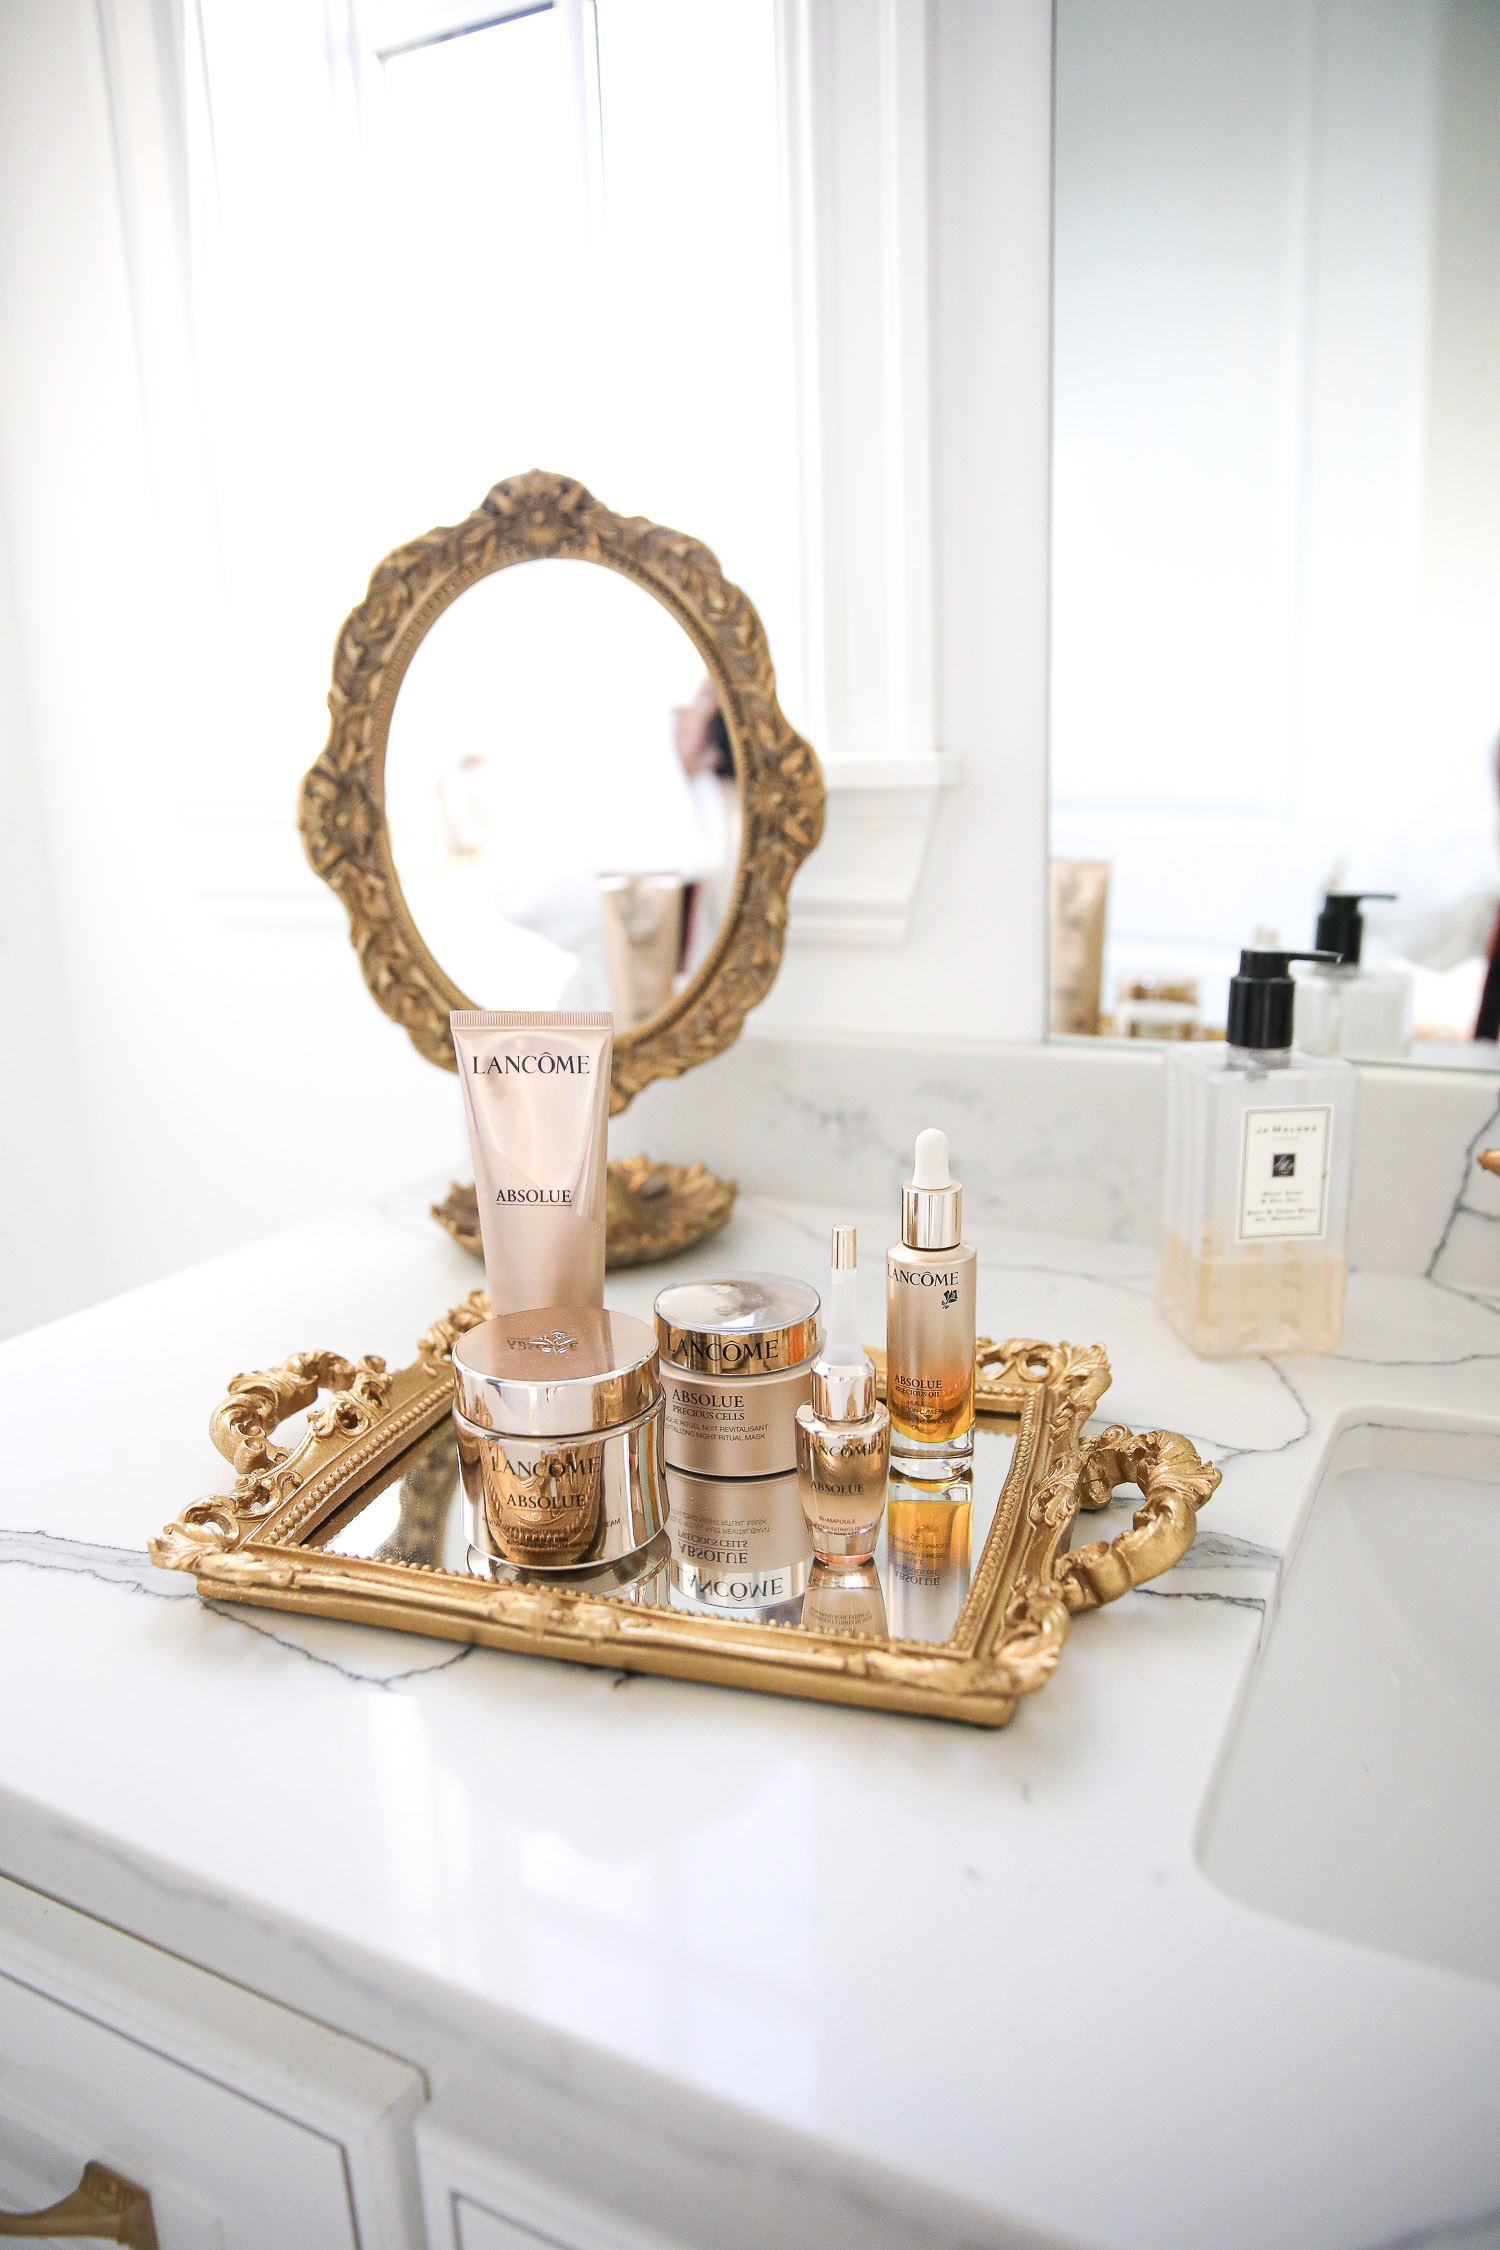 Lancome Skincare by popular US beauty blog, The Sweetest Thing: image of Lancome Absolue skincare products on a mirrored tray with gold handles. 